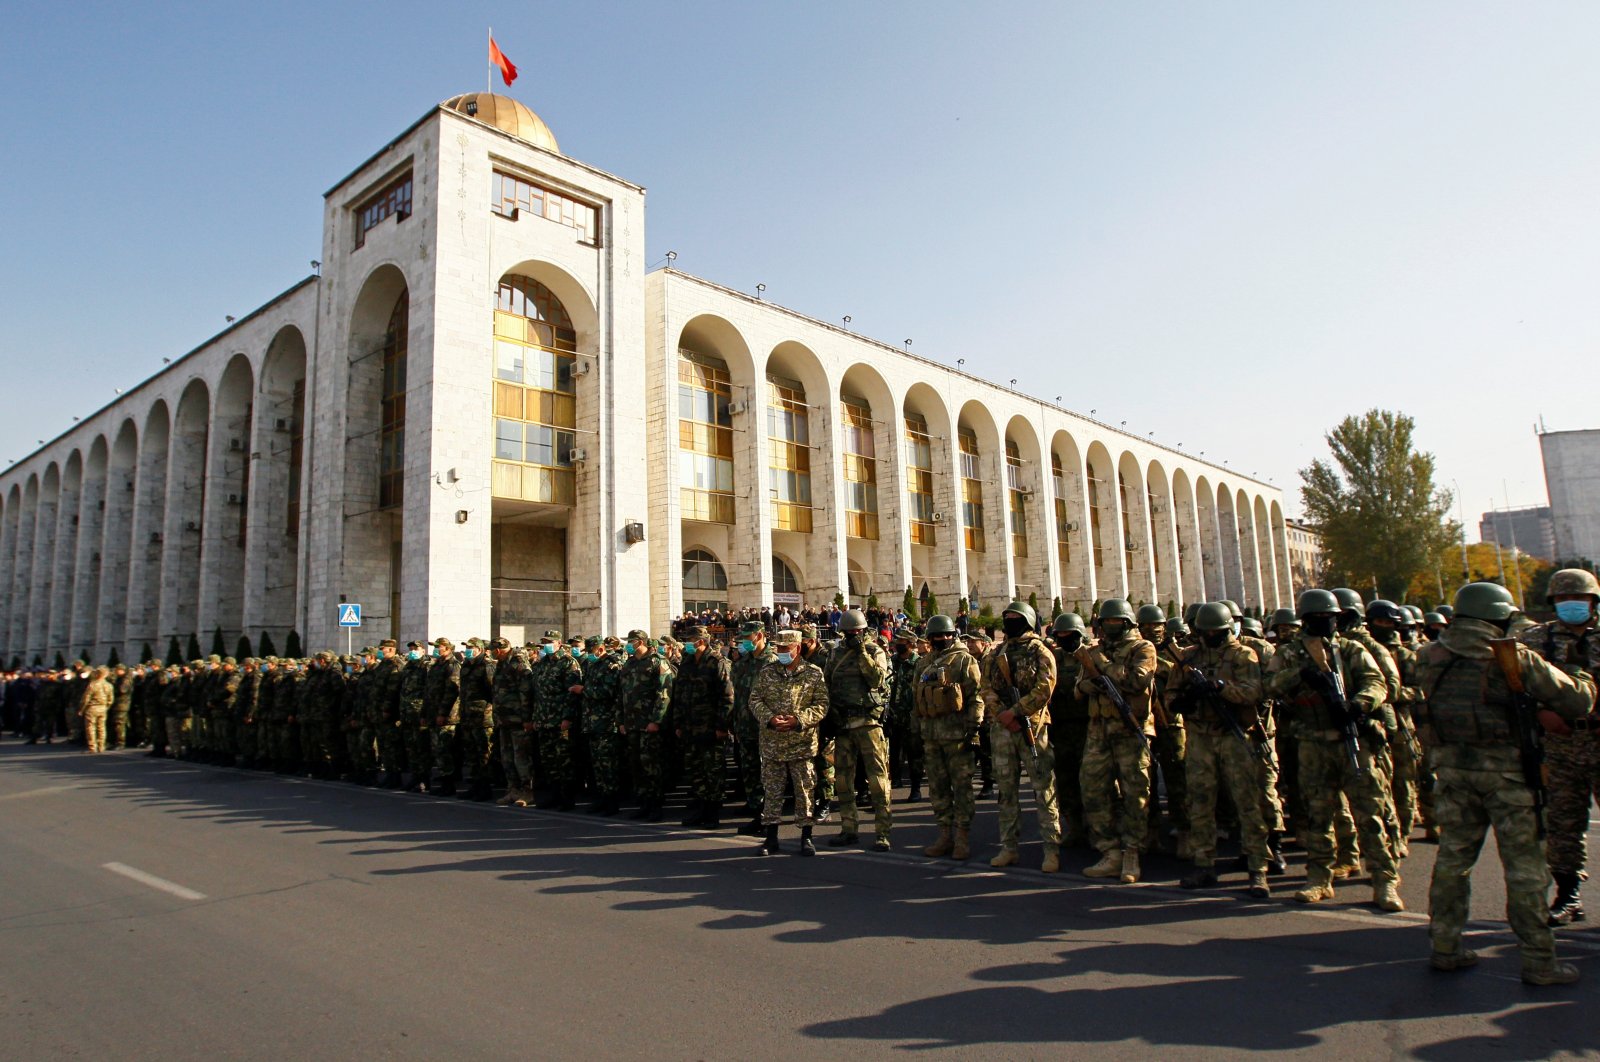 Members of armed forces stand in formation in Ala-Too Square after authorities declared a state of emergency in the capital and ordered troops to be deployed there, in Bishkek, Kyrgyzstan, Oct. 10, 2020. (Reuters Photo)